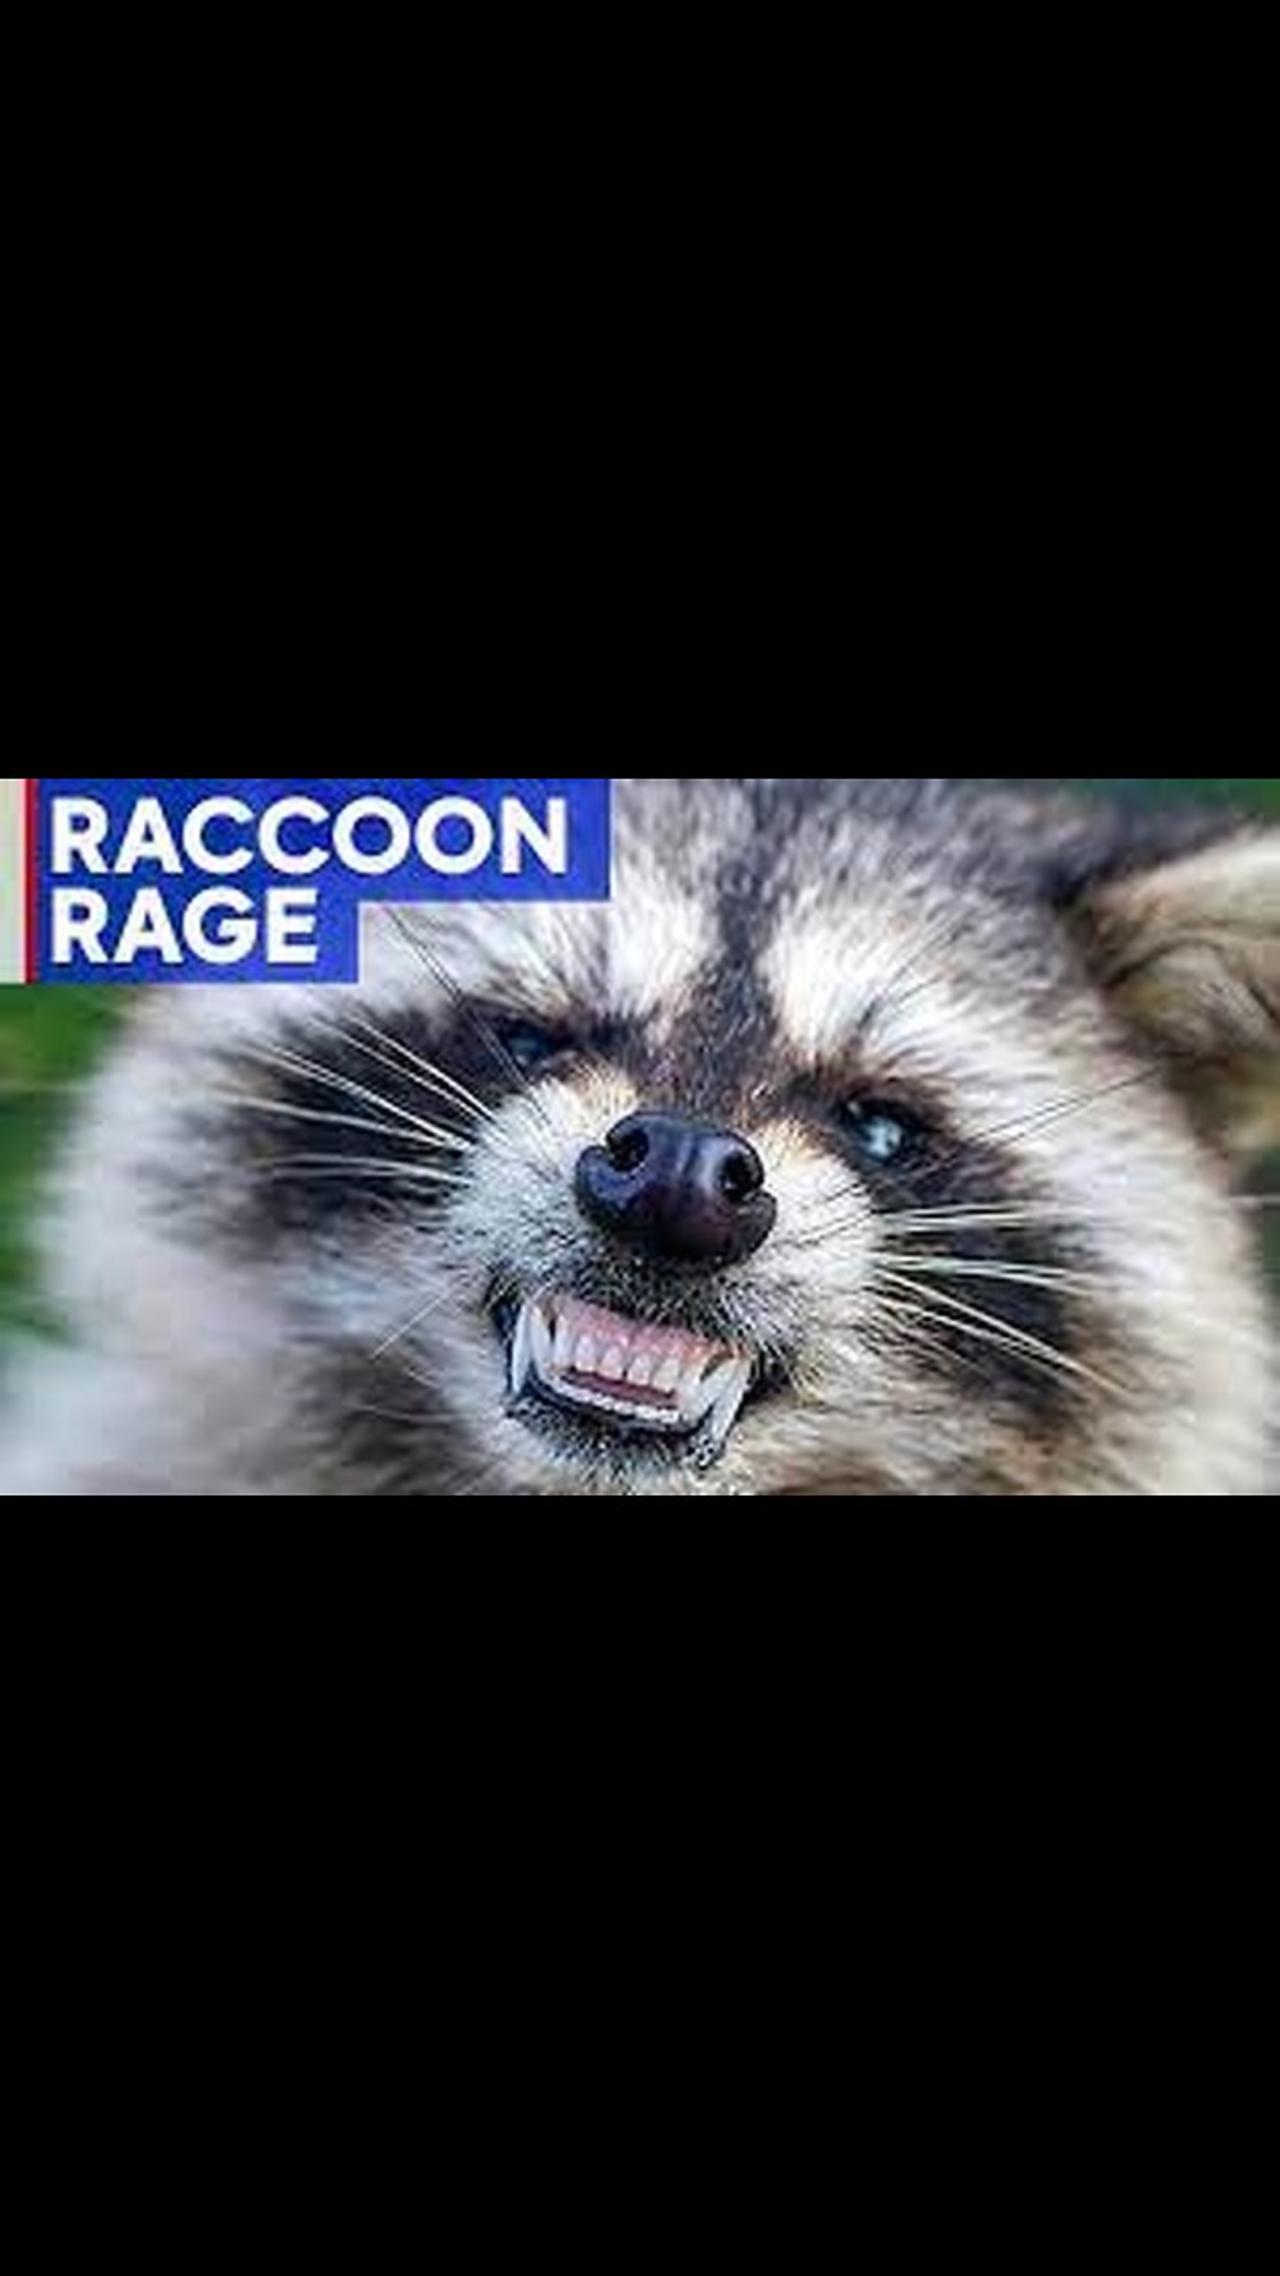 Heroic mom saves terrified five-year-old from raccoon attack